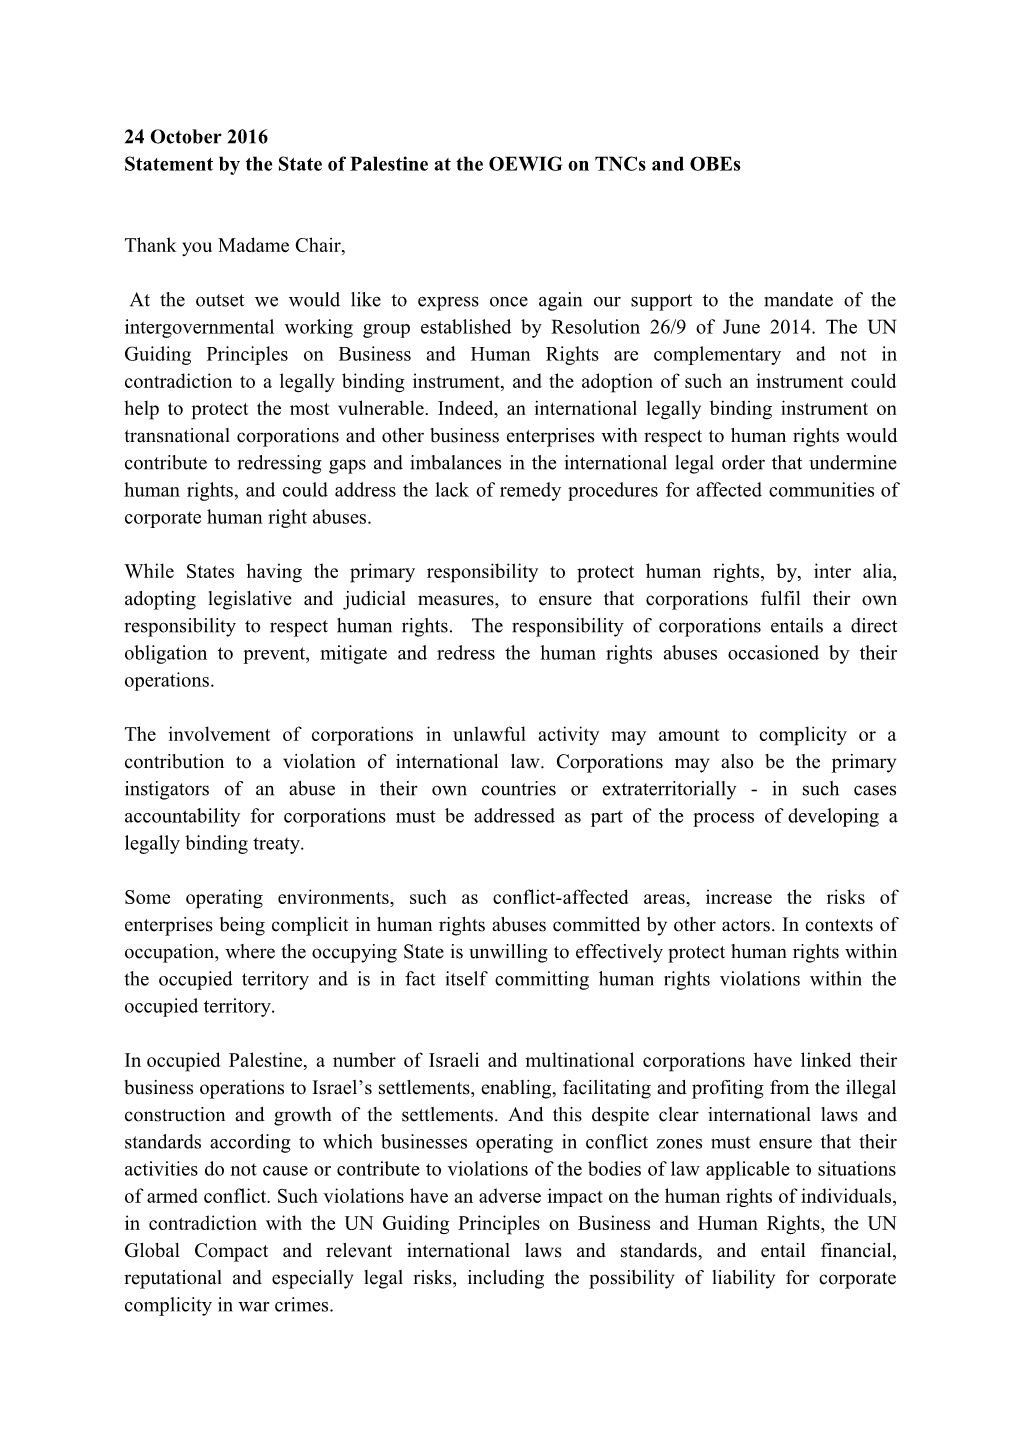 Statement by the State of Palestine at the OEWIG on Tncs and Obes